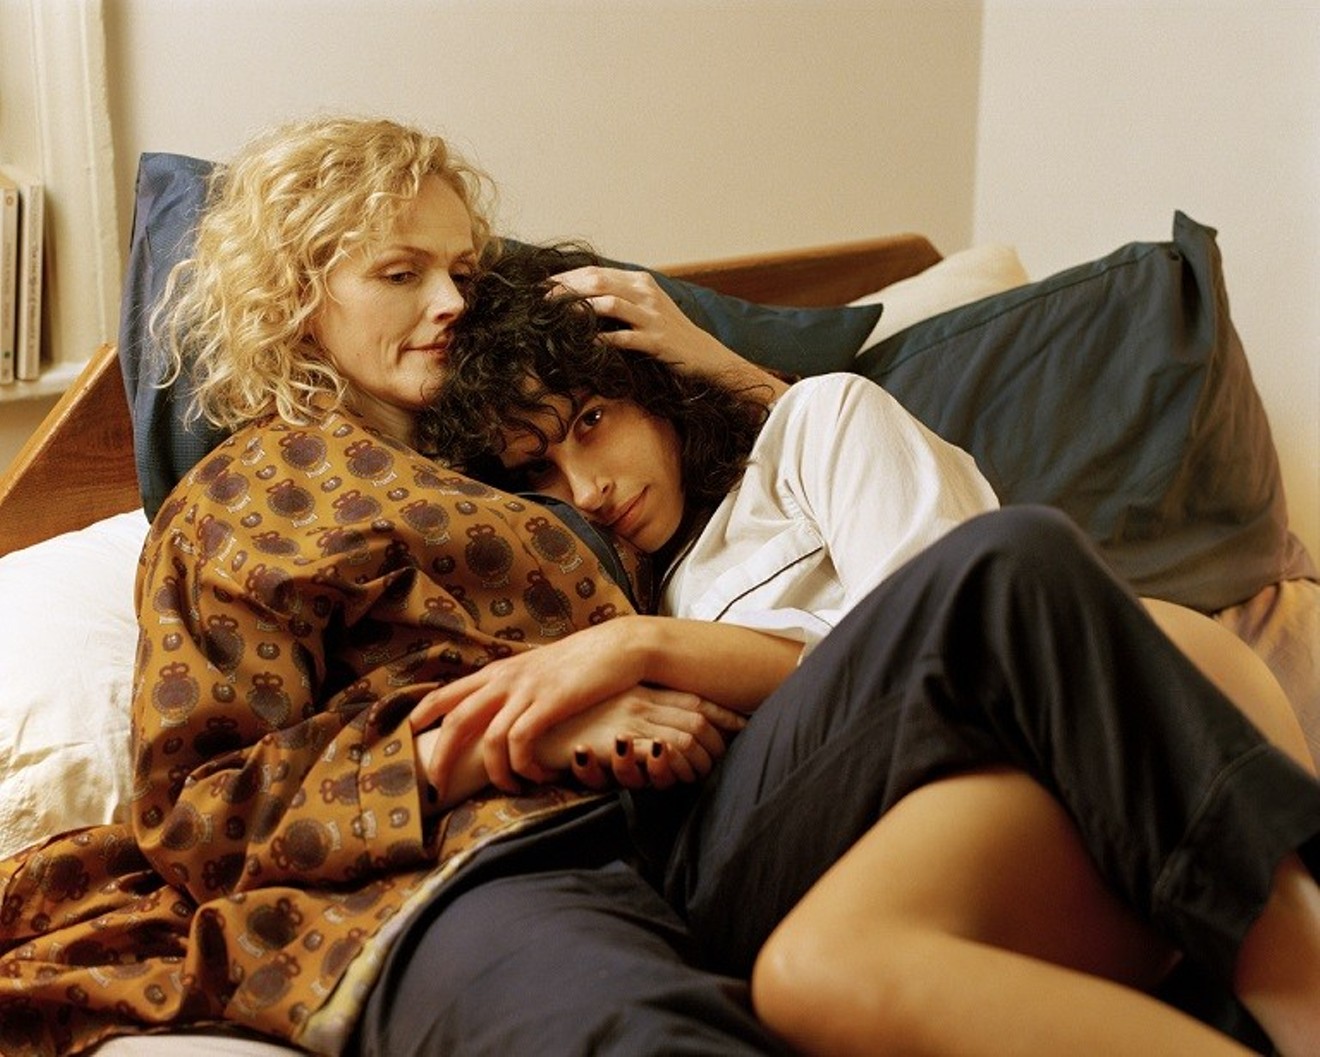 Desiree Akhavan (right) not only created and cowrote Hulu's The Bisexual, but also stars as Leila, who decides to end a relationship with Sadie (Maxine Peake) to have sex with men and women.